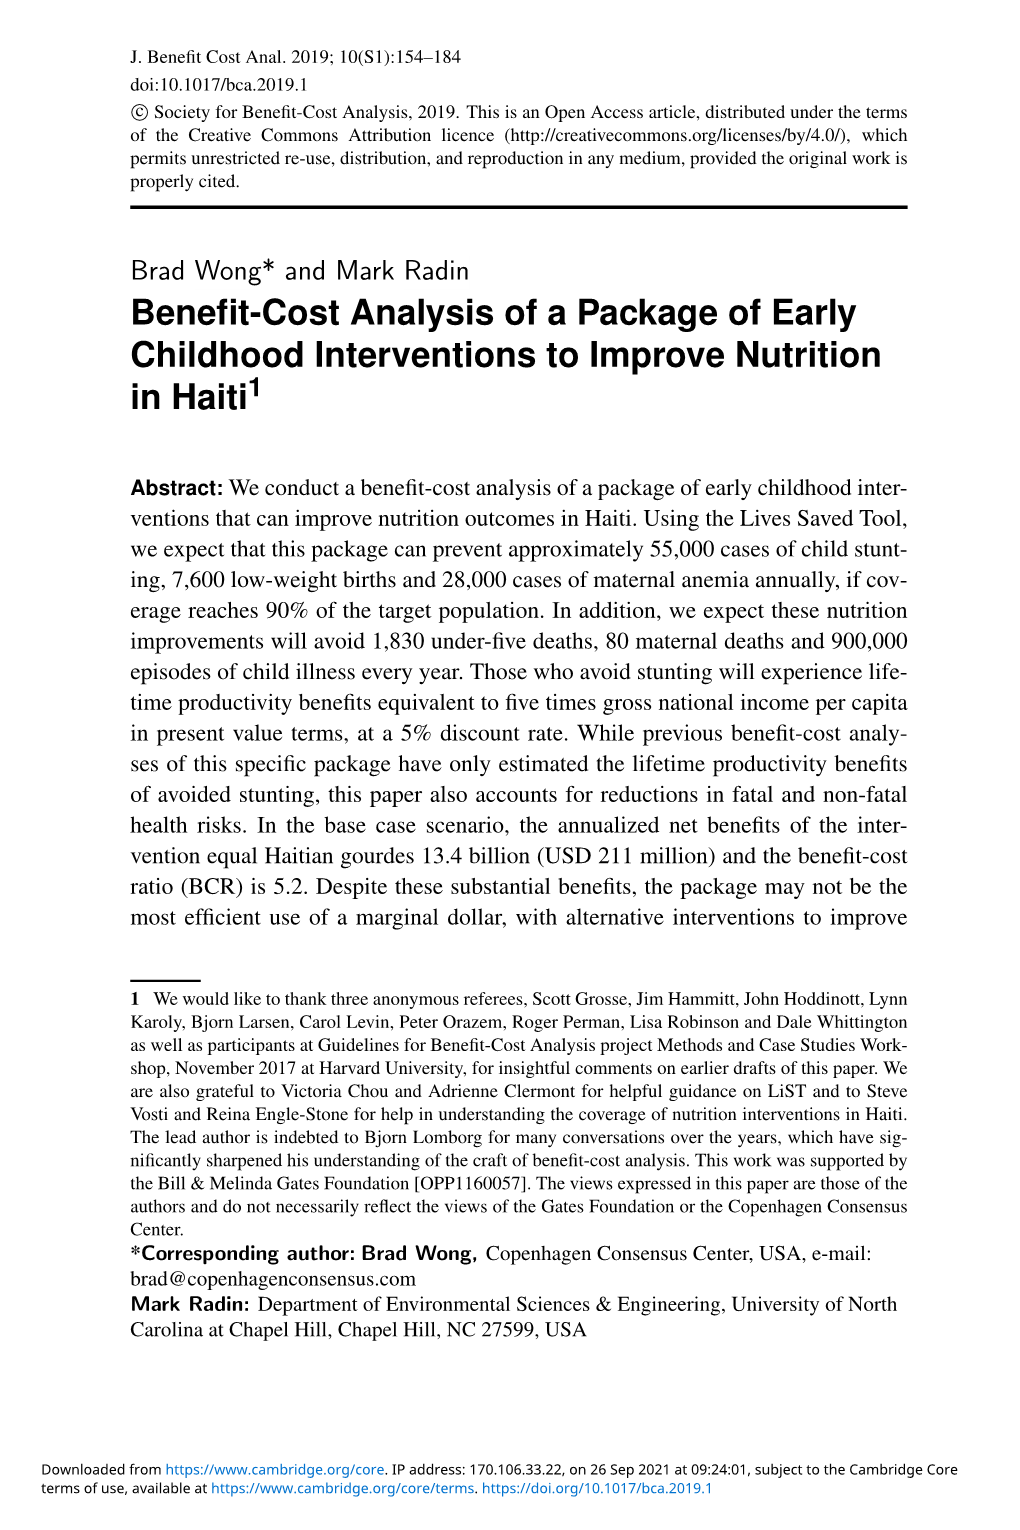 Benefit-Cost Analysis of a Package of Early Childhood Interventions To